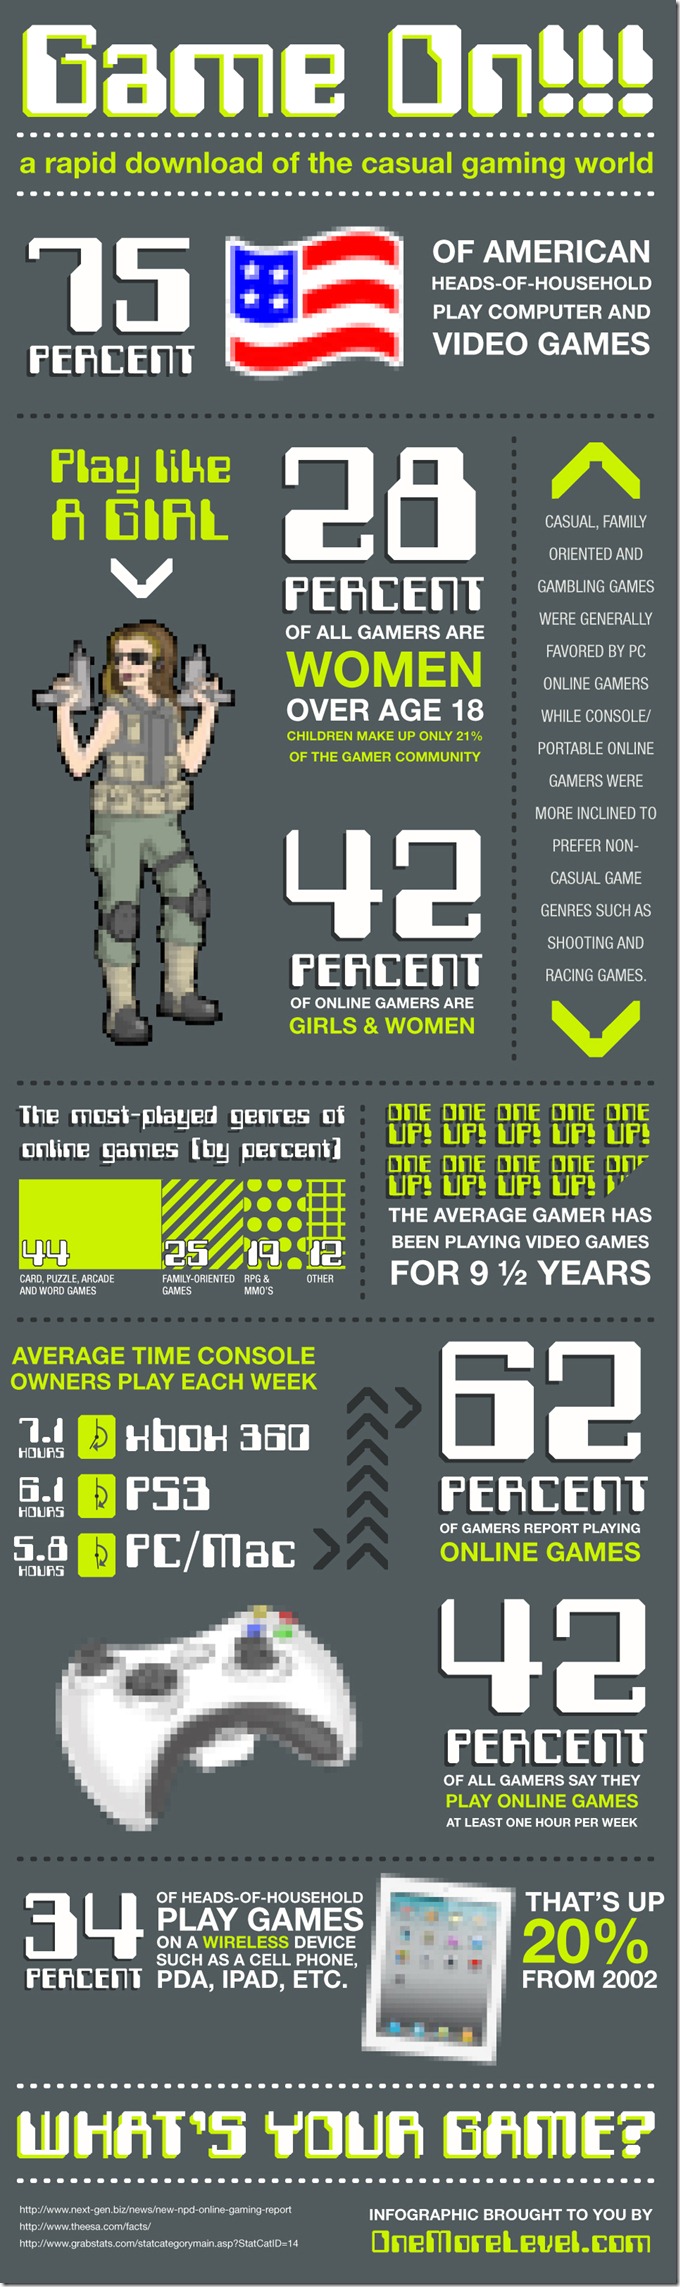 casual-gaming-infographic